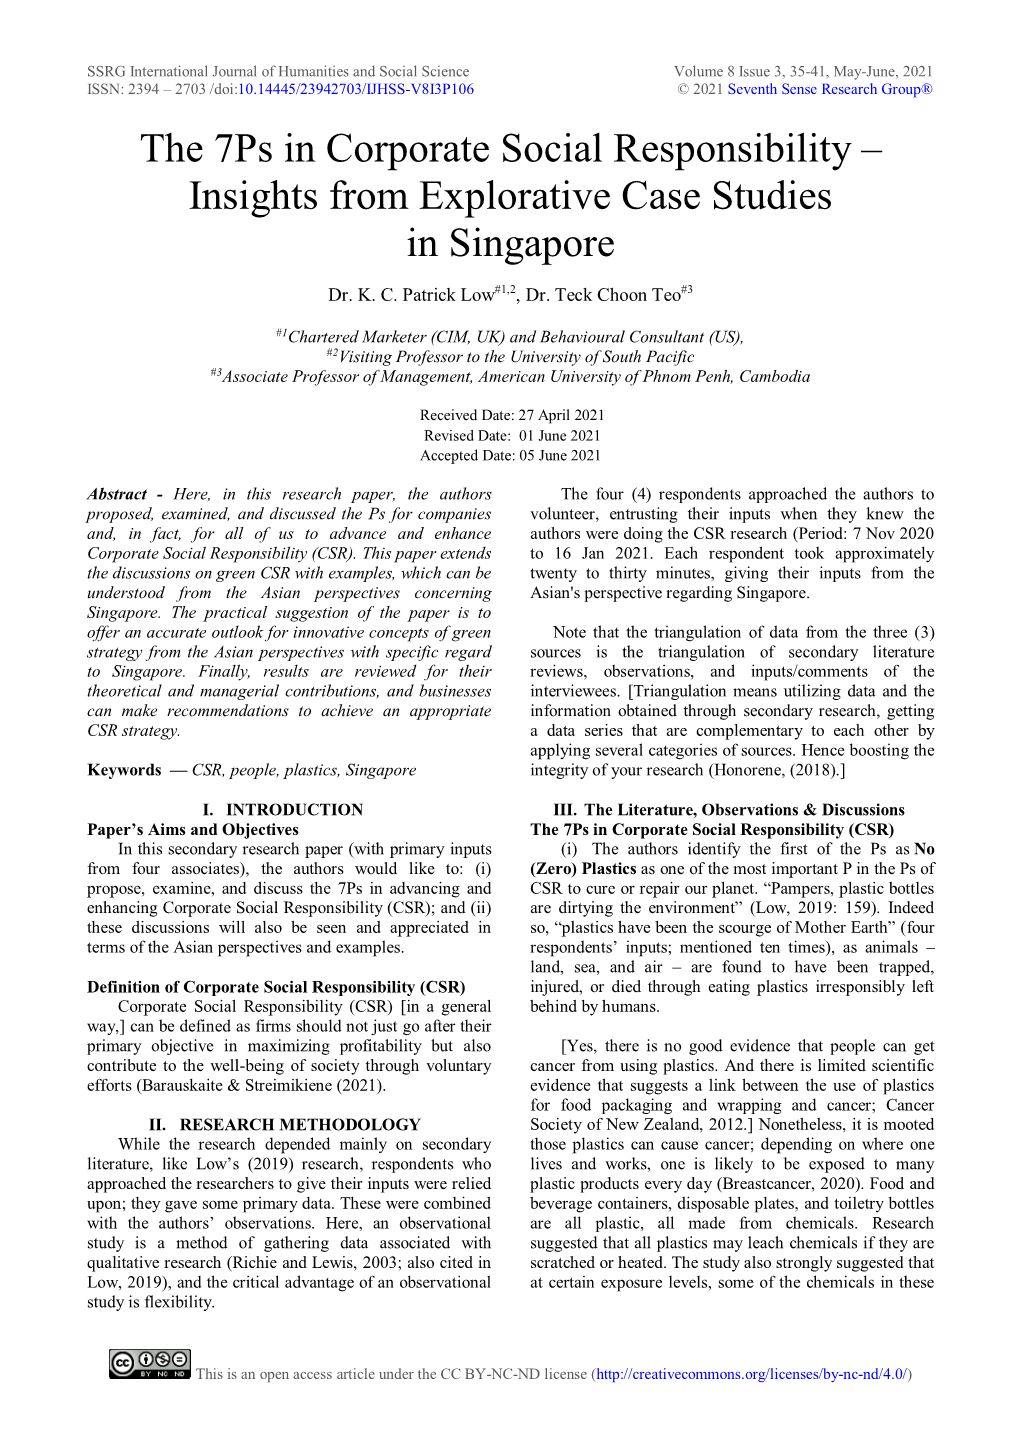 The 7Ps in Corporate Social Responsibility – Insights from Explorative Case Studies in Singapore